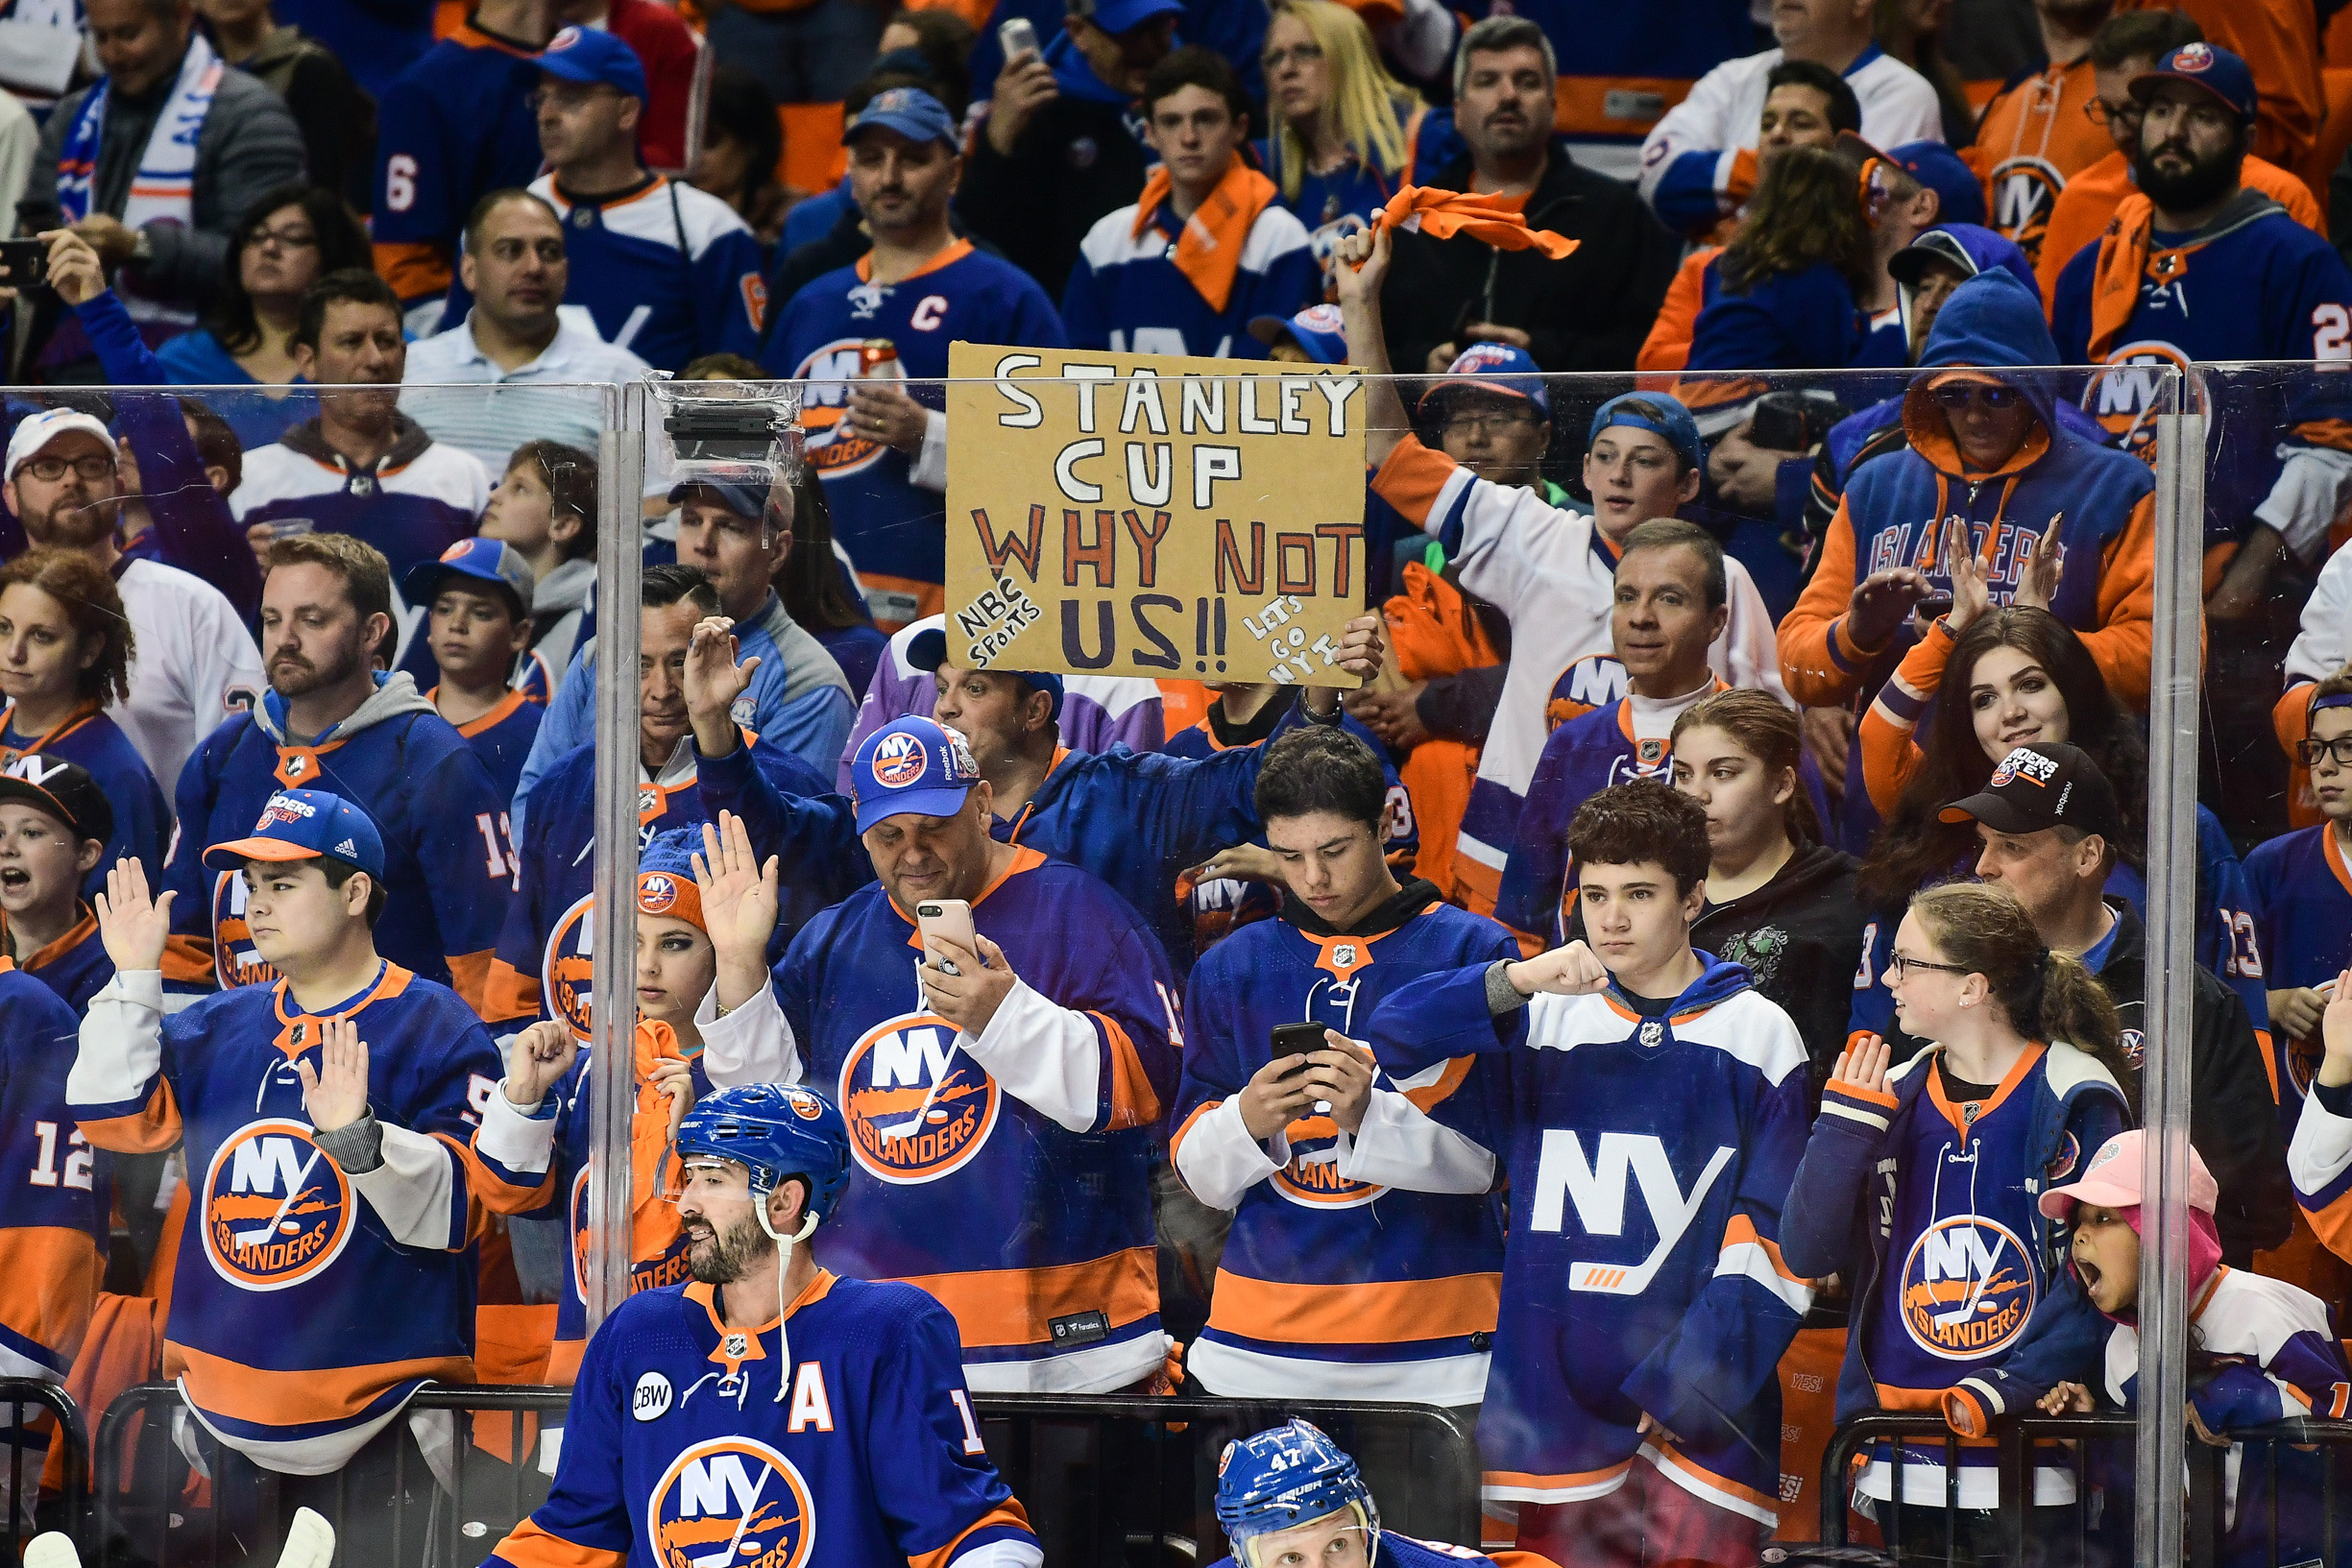 Apr 26, 2019; Brooklyn, NY, USA; Islanders fans holding a sign during warmups during a game between the New York Islanders and Carolina Hurricanes in game one of the second round of the 2019 Stanley Cup Playoffs at Barclays Center. Mandatory Credit: Catalina Fragoso-USA TODAY Sports